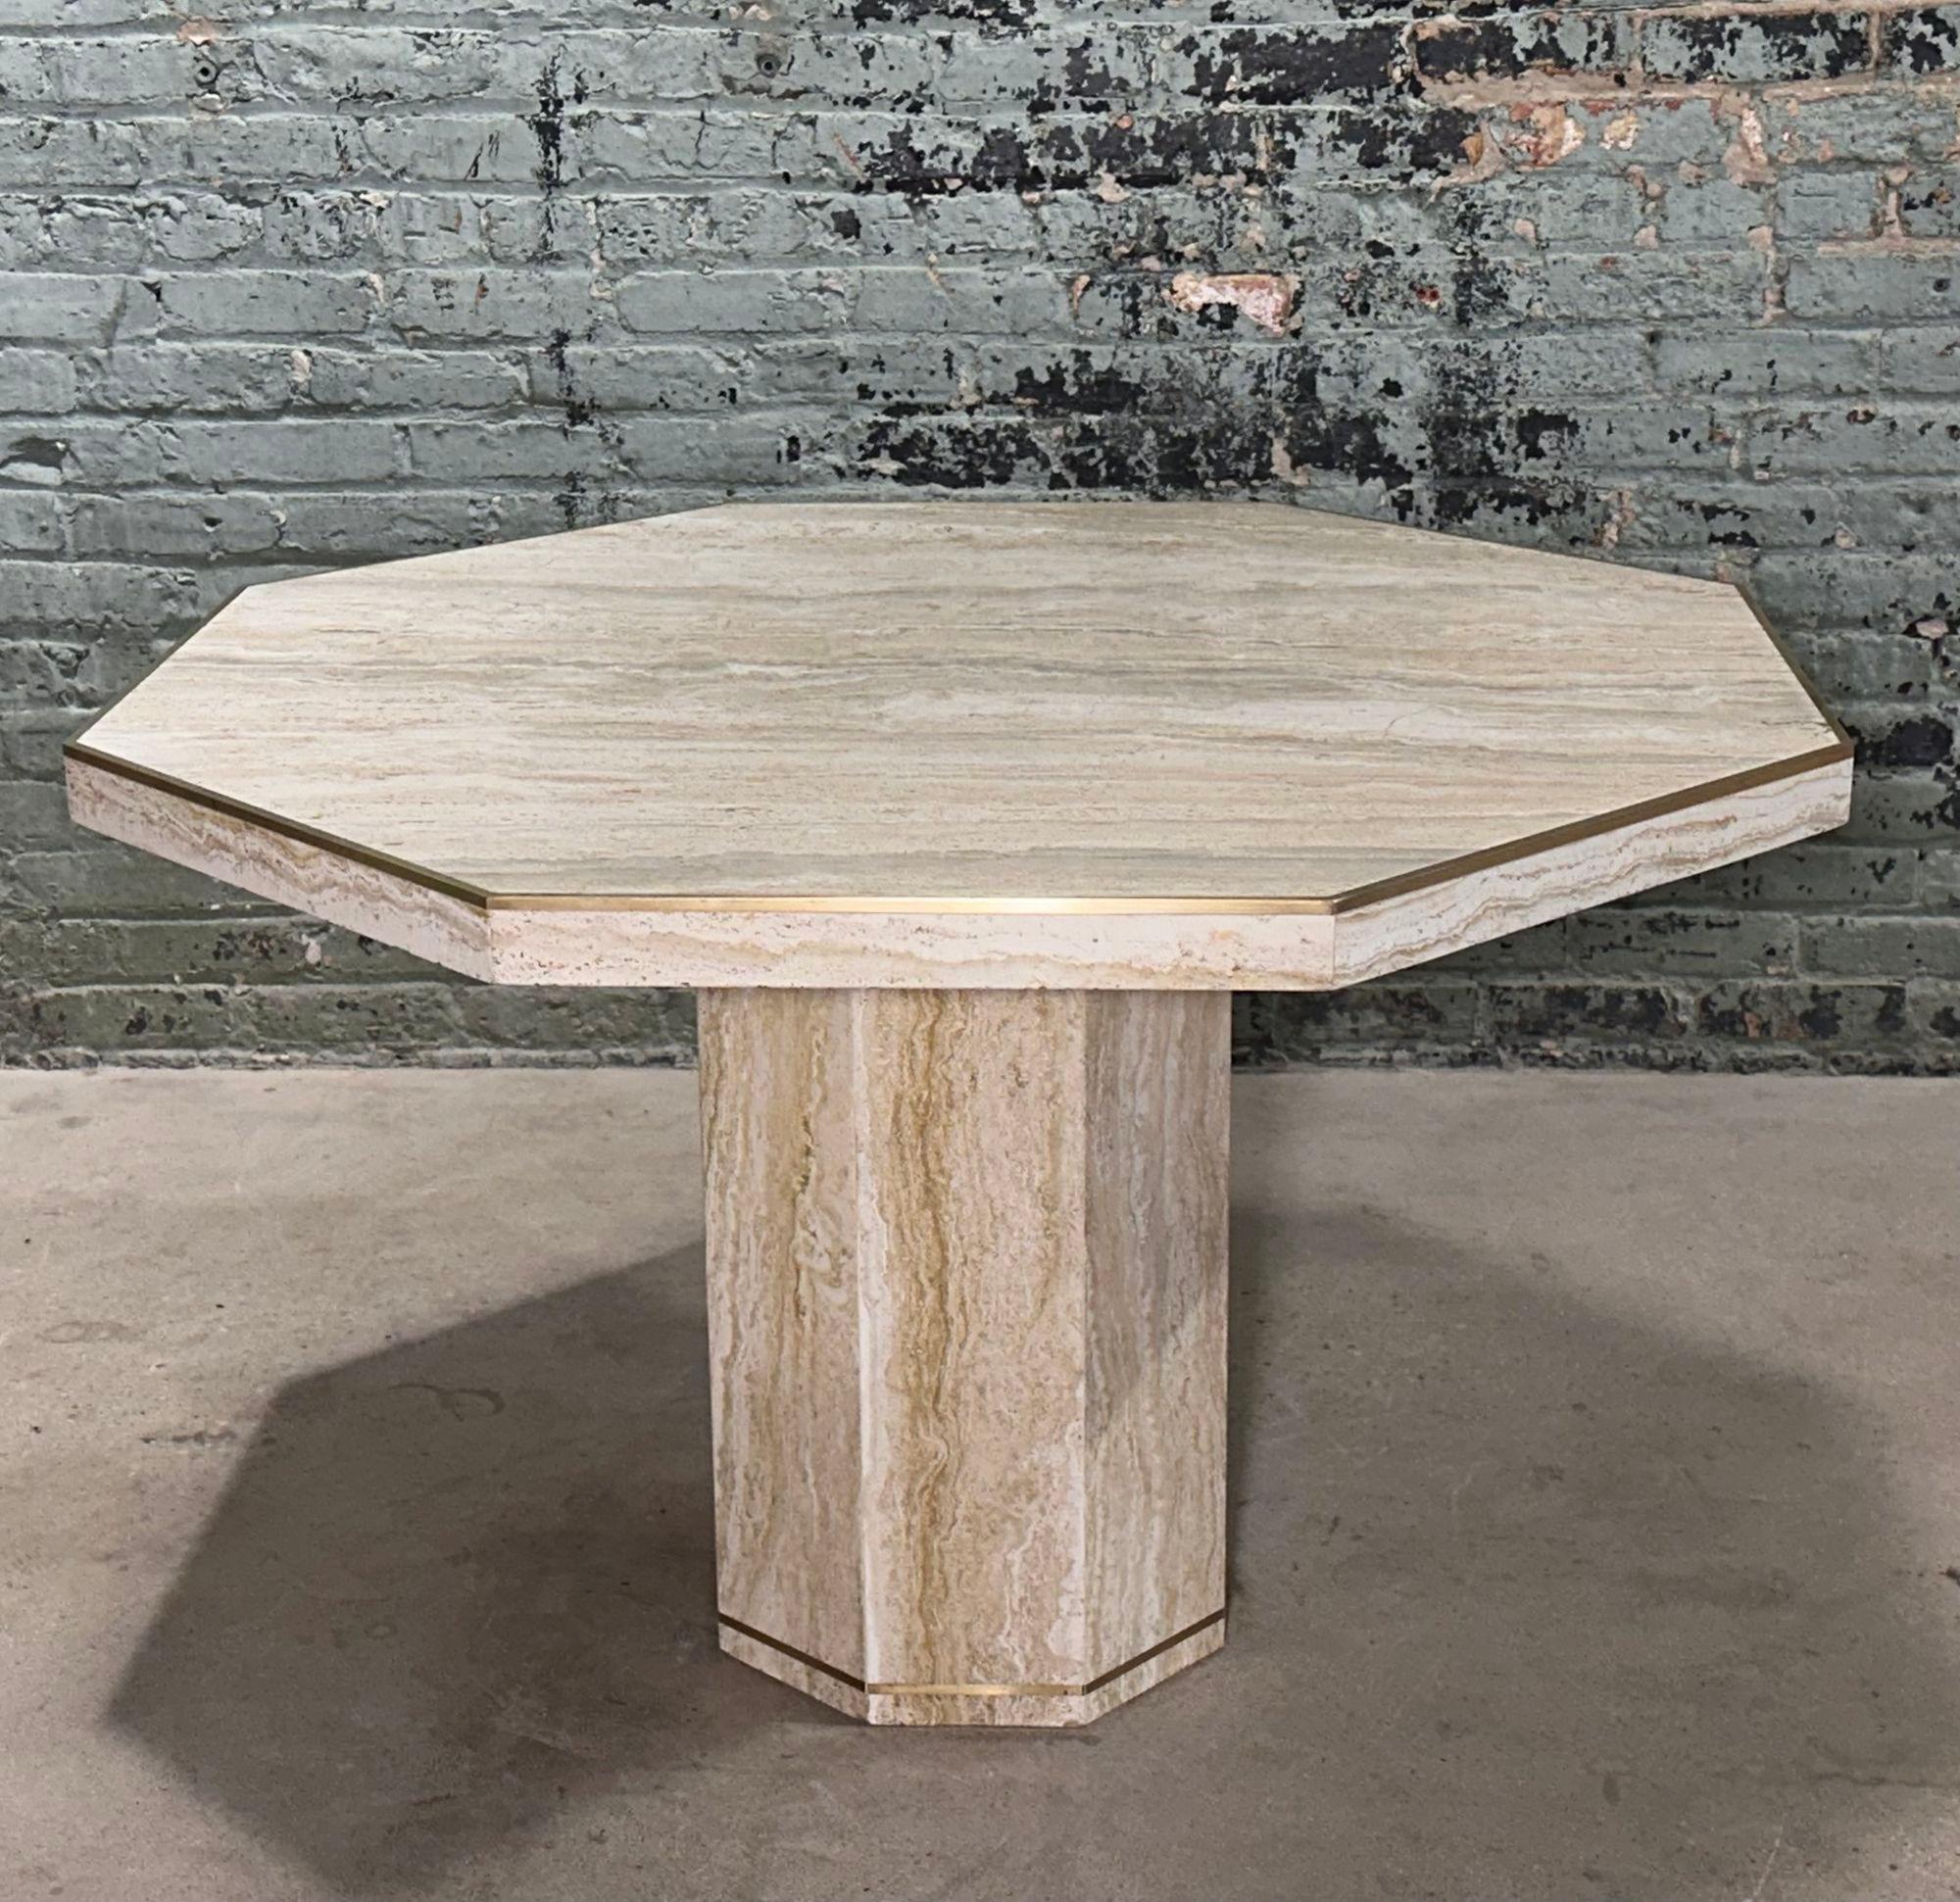 Italian Hexagon Travertine/Brass Dining/Center Table, Italy 1970. Table has beautiful brass around the edges of table and base.
Measures 43.75